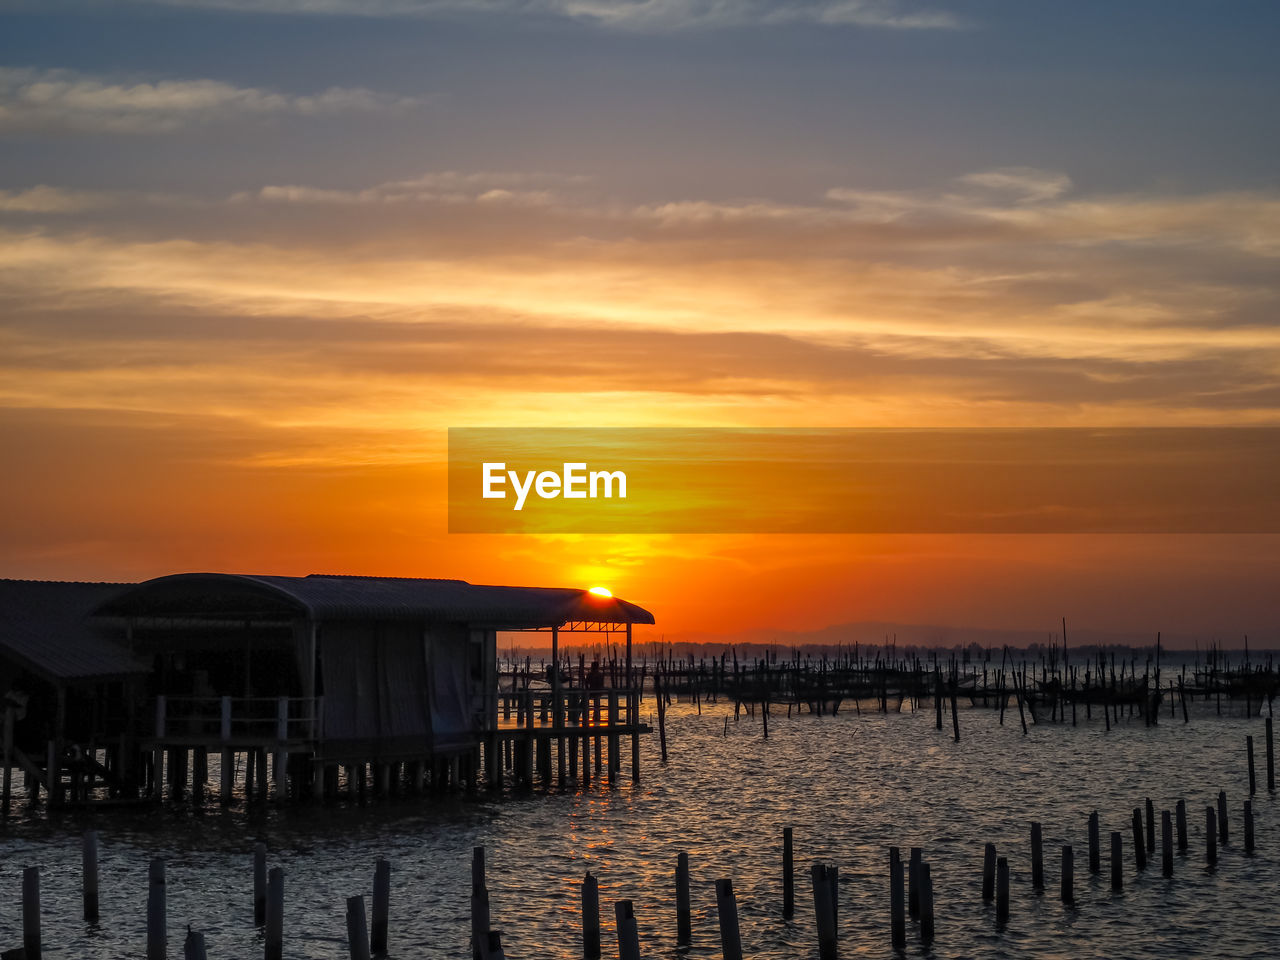 sky, sunset, water, sea, cloud, pier, architecture, beauty in nature, nature, built structure, beach, scenics - nature, tranquility, tranquil scene, orange color, land, wood, evening, horizon, hut, dusk, idyllic, building exterior, no people, ocean, stilt house, sun, wooden post, building, outdoors, travel destinations, horizon over water, post, sunlight, coast, reflection, silhouette, holiday, dramatic sky, shore, vacation, trip, tourism, travel, house, non-urban scene, afterglow